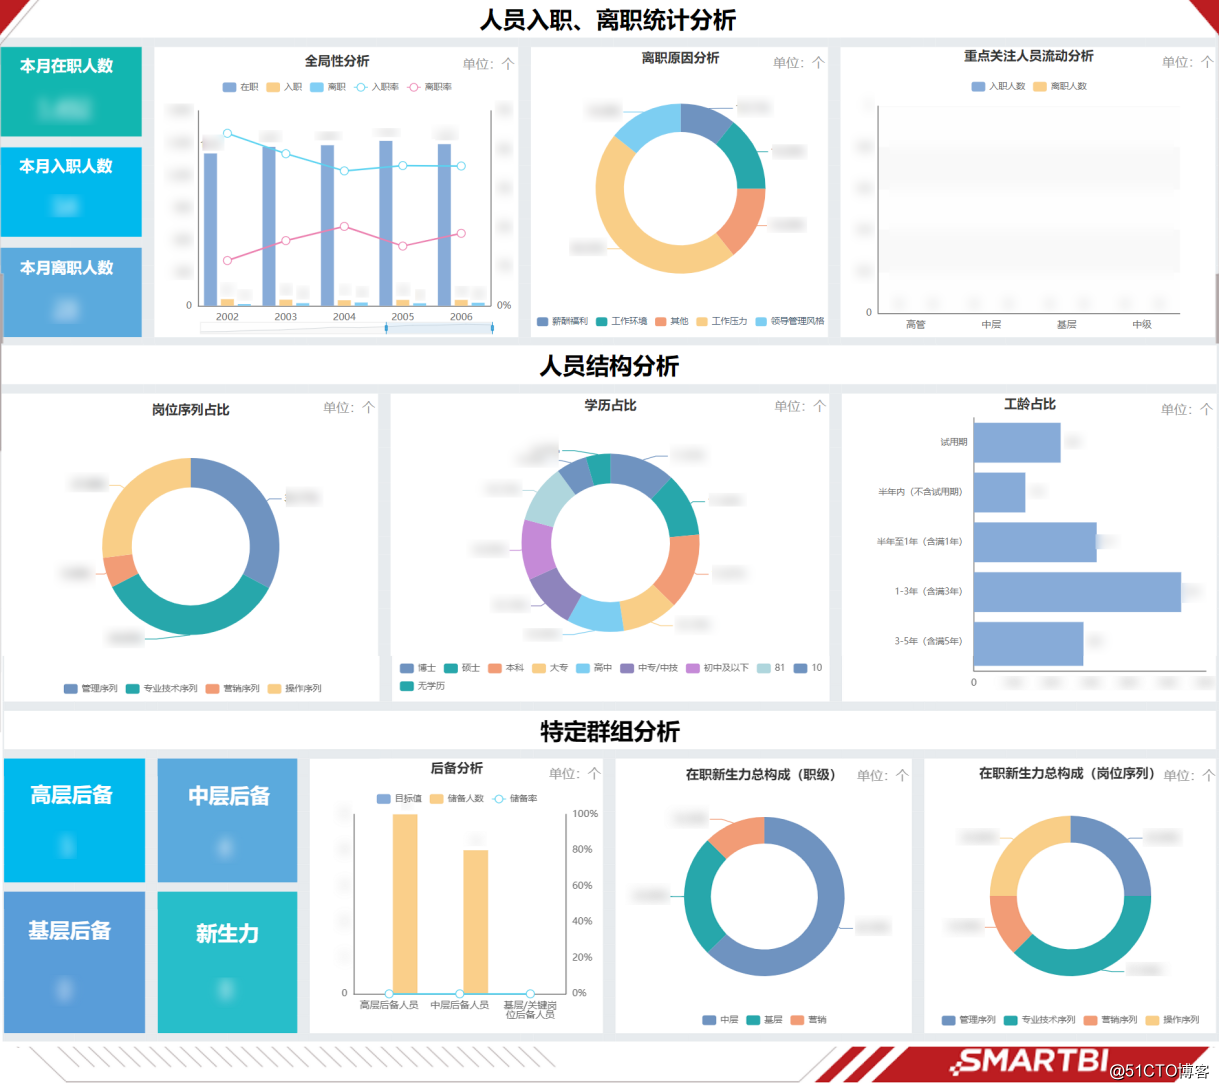 How does a listed company with an annual output value of more than 6 billion yuan make data visualization and standardization